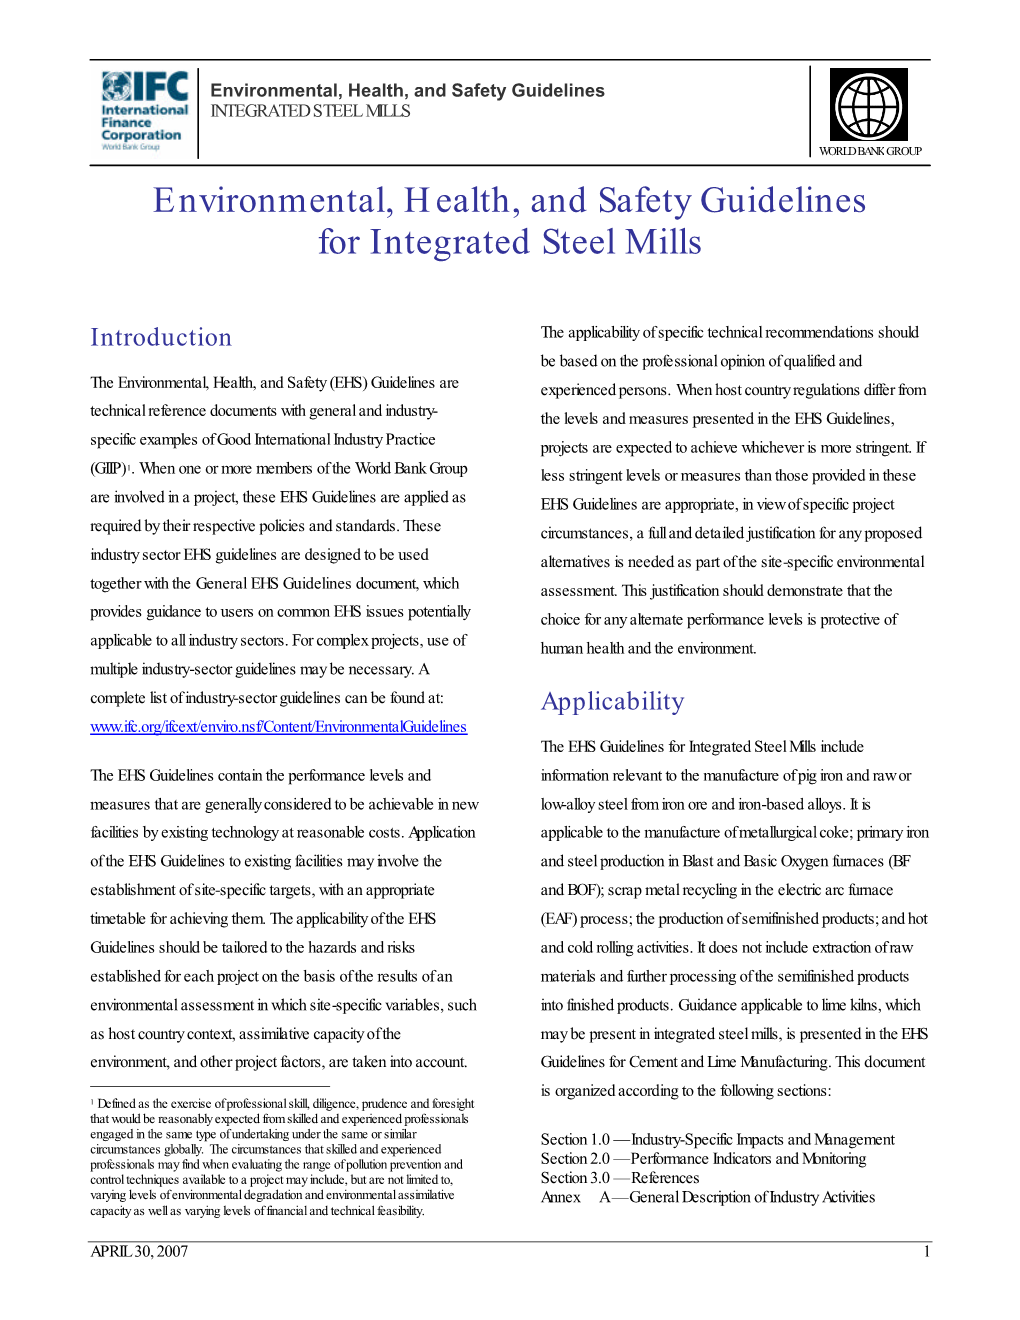 Environmental, Health, and Safety Guidelines for Integrated Steel Mills